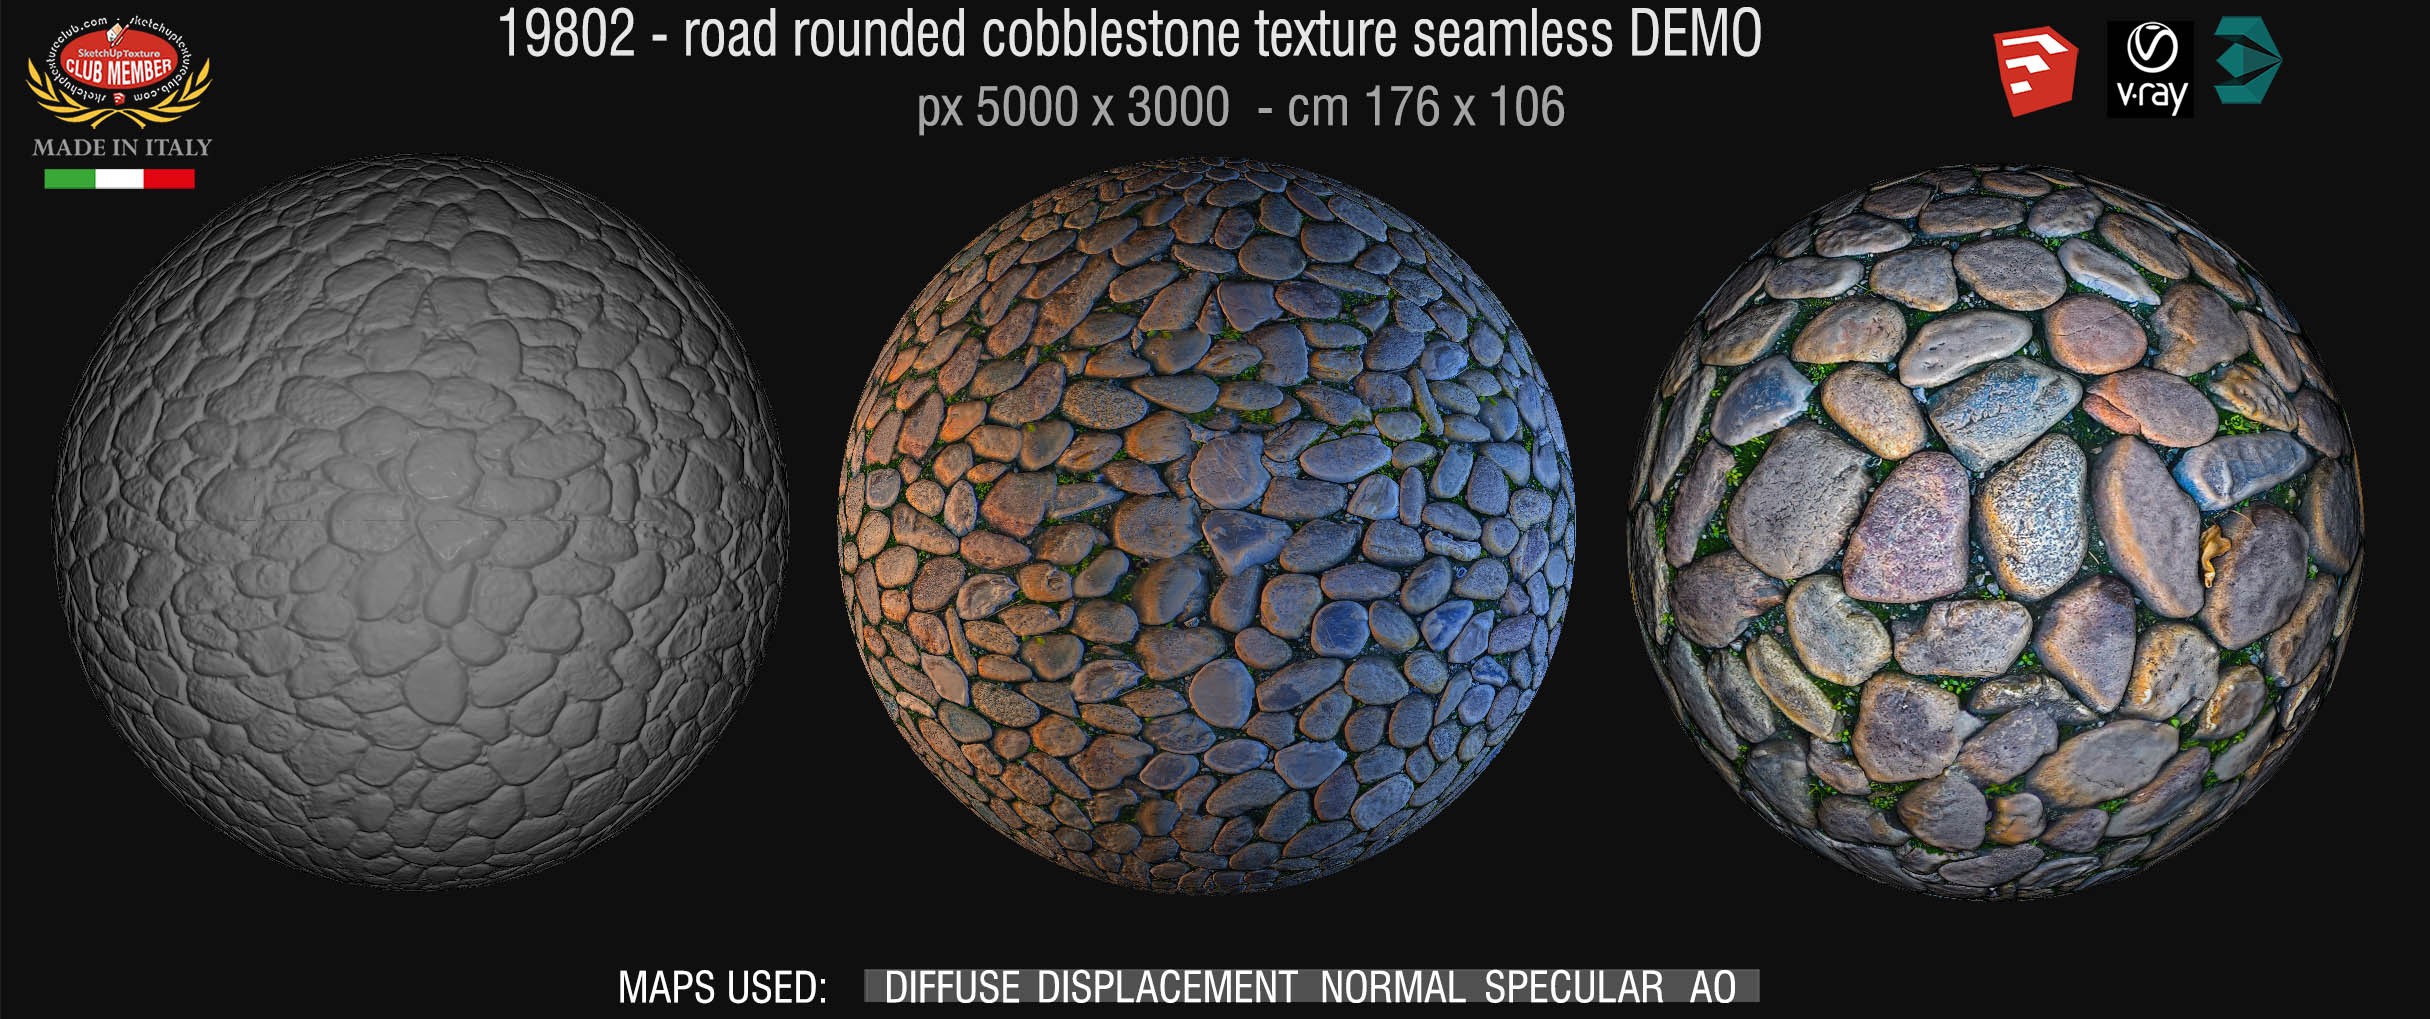 19802 Road rounded cobblestone texture seamless + maps DEMO